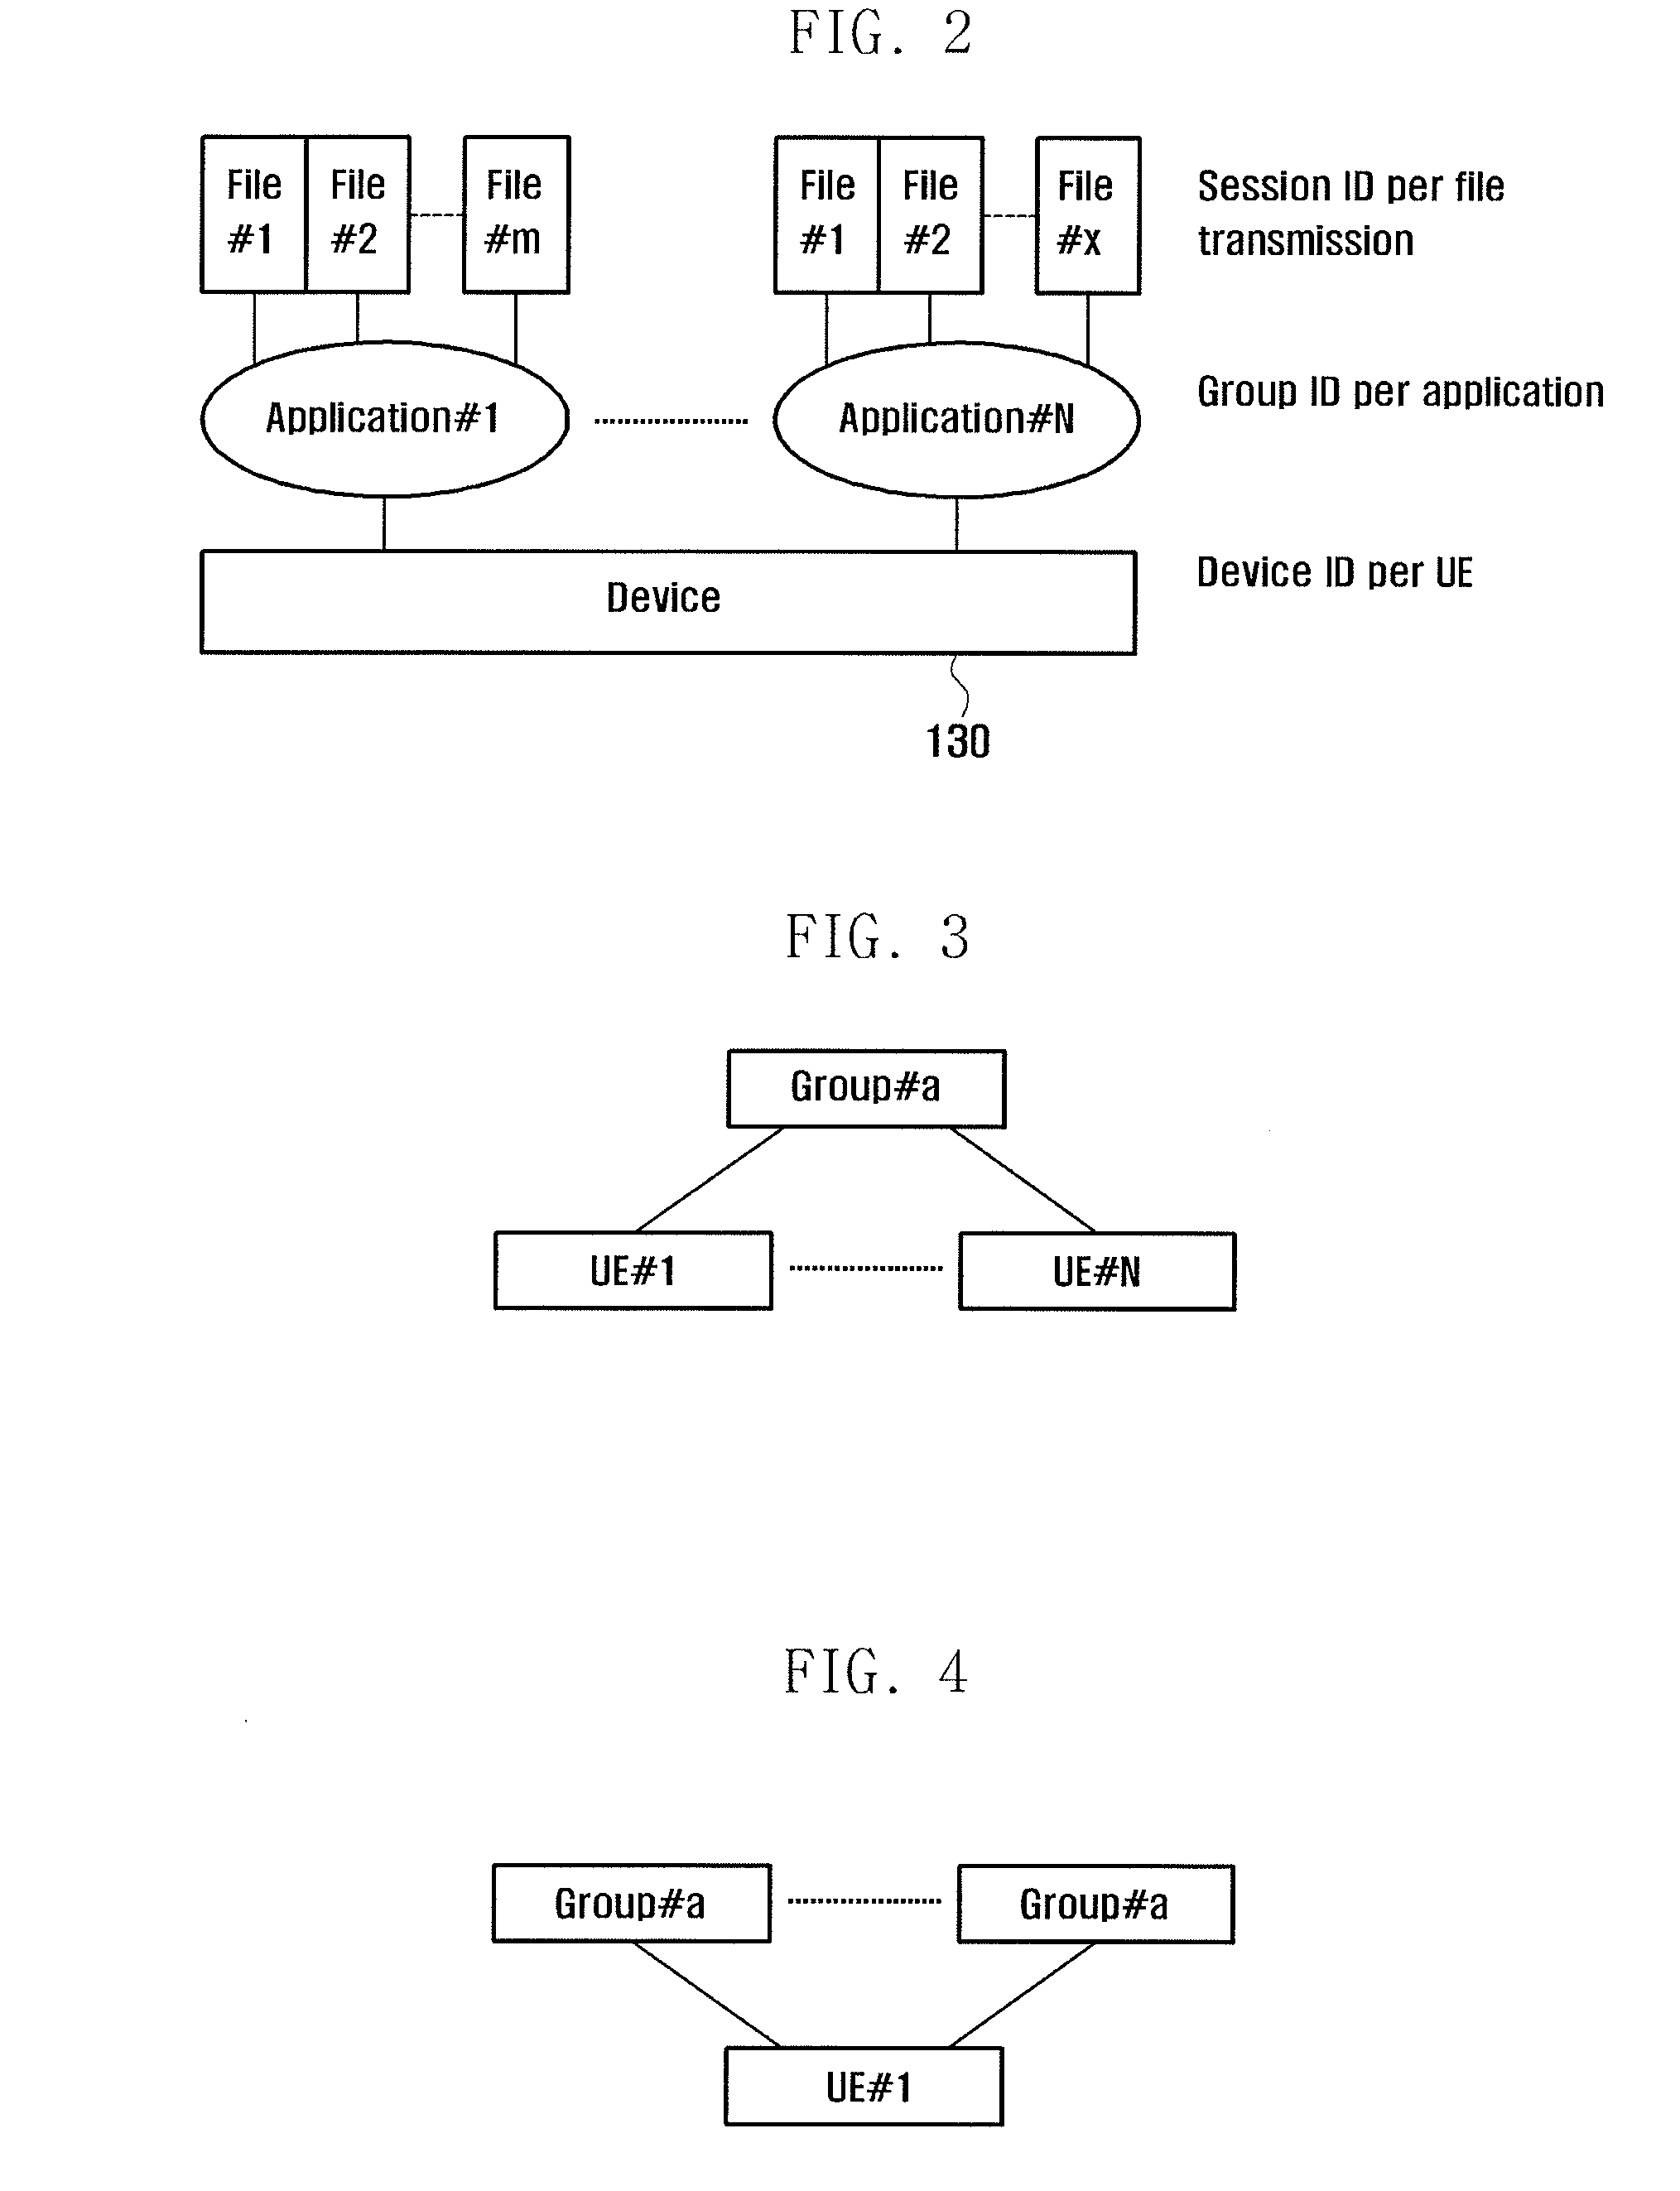 Apparatus and method for reliably and dynamically transmitting group information via a wireless multicast or broadcast channel